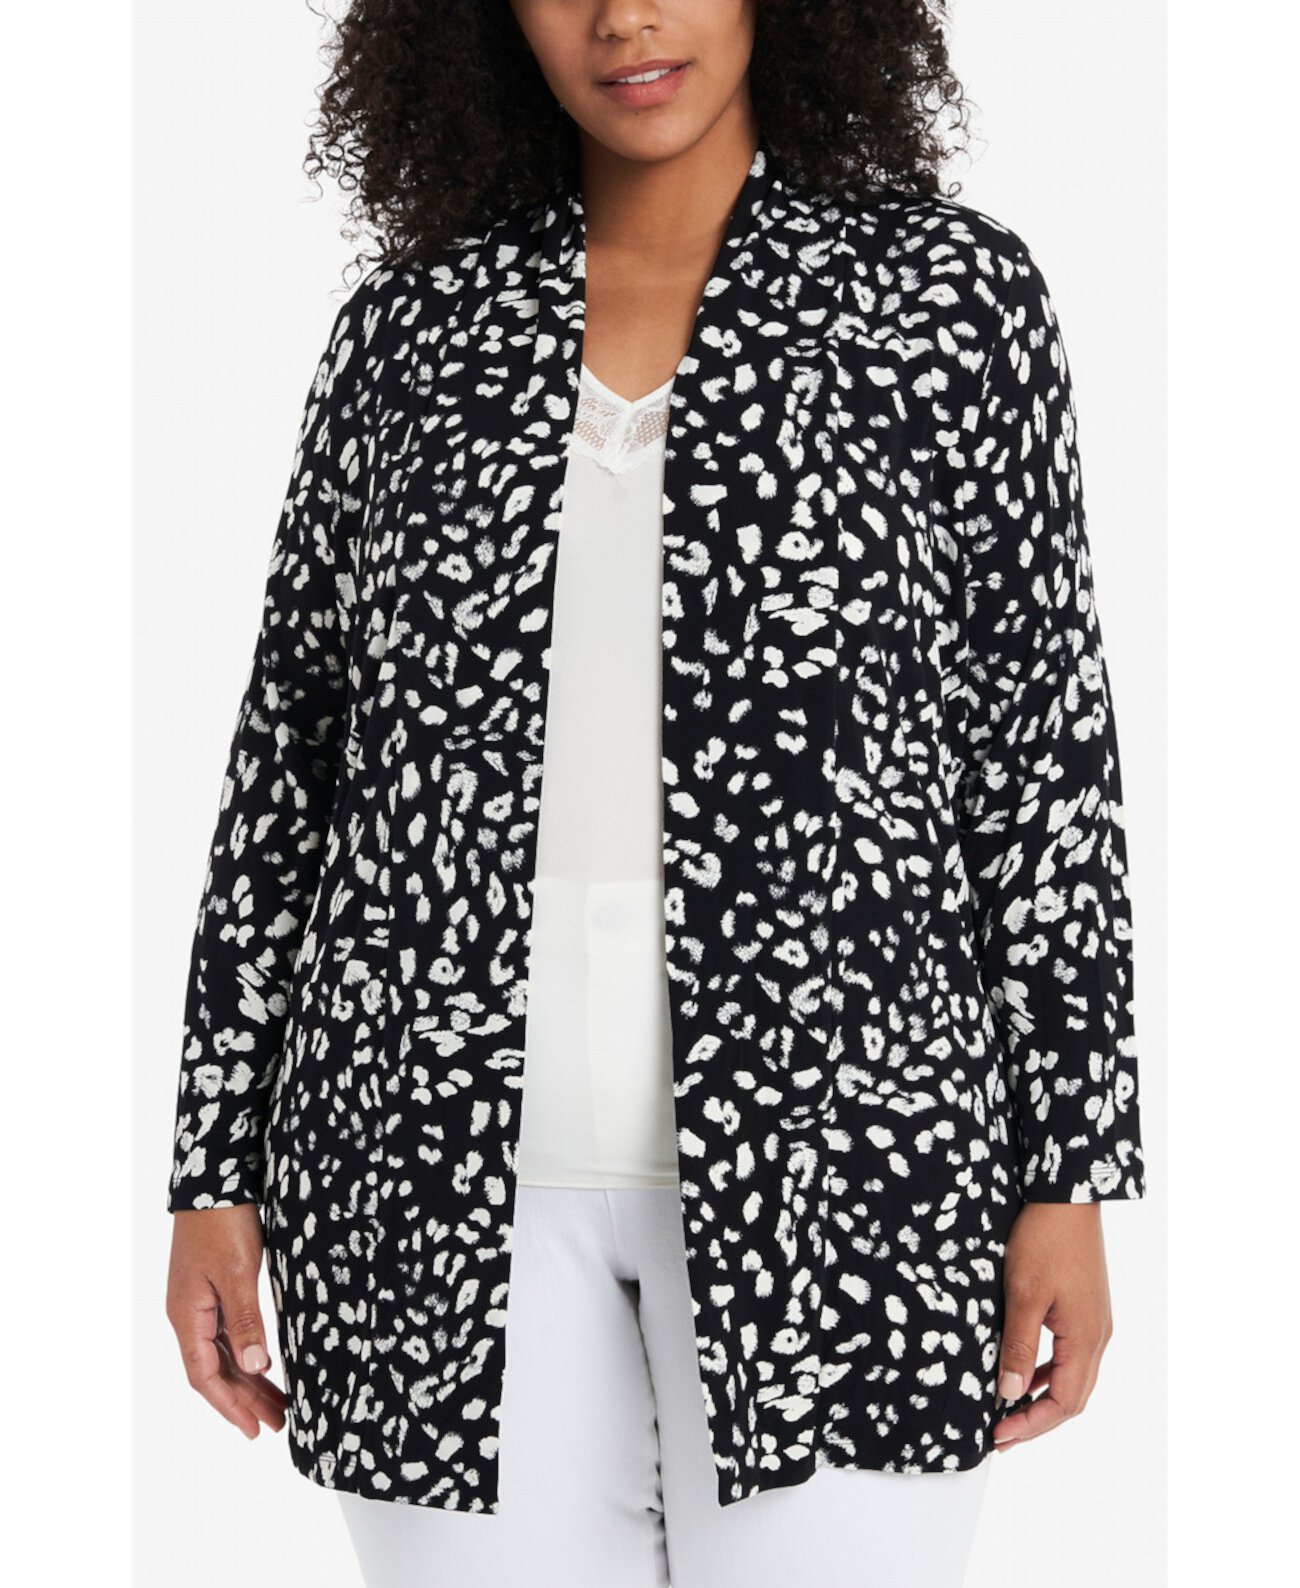 Women's Plus Size Open Front Printed Cardigan Vince Camuto